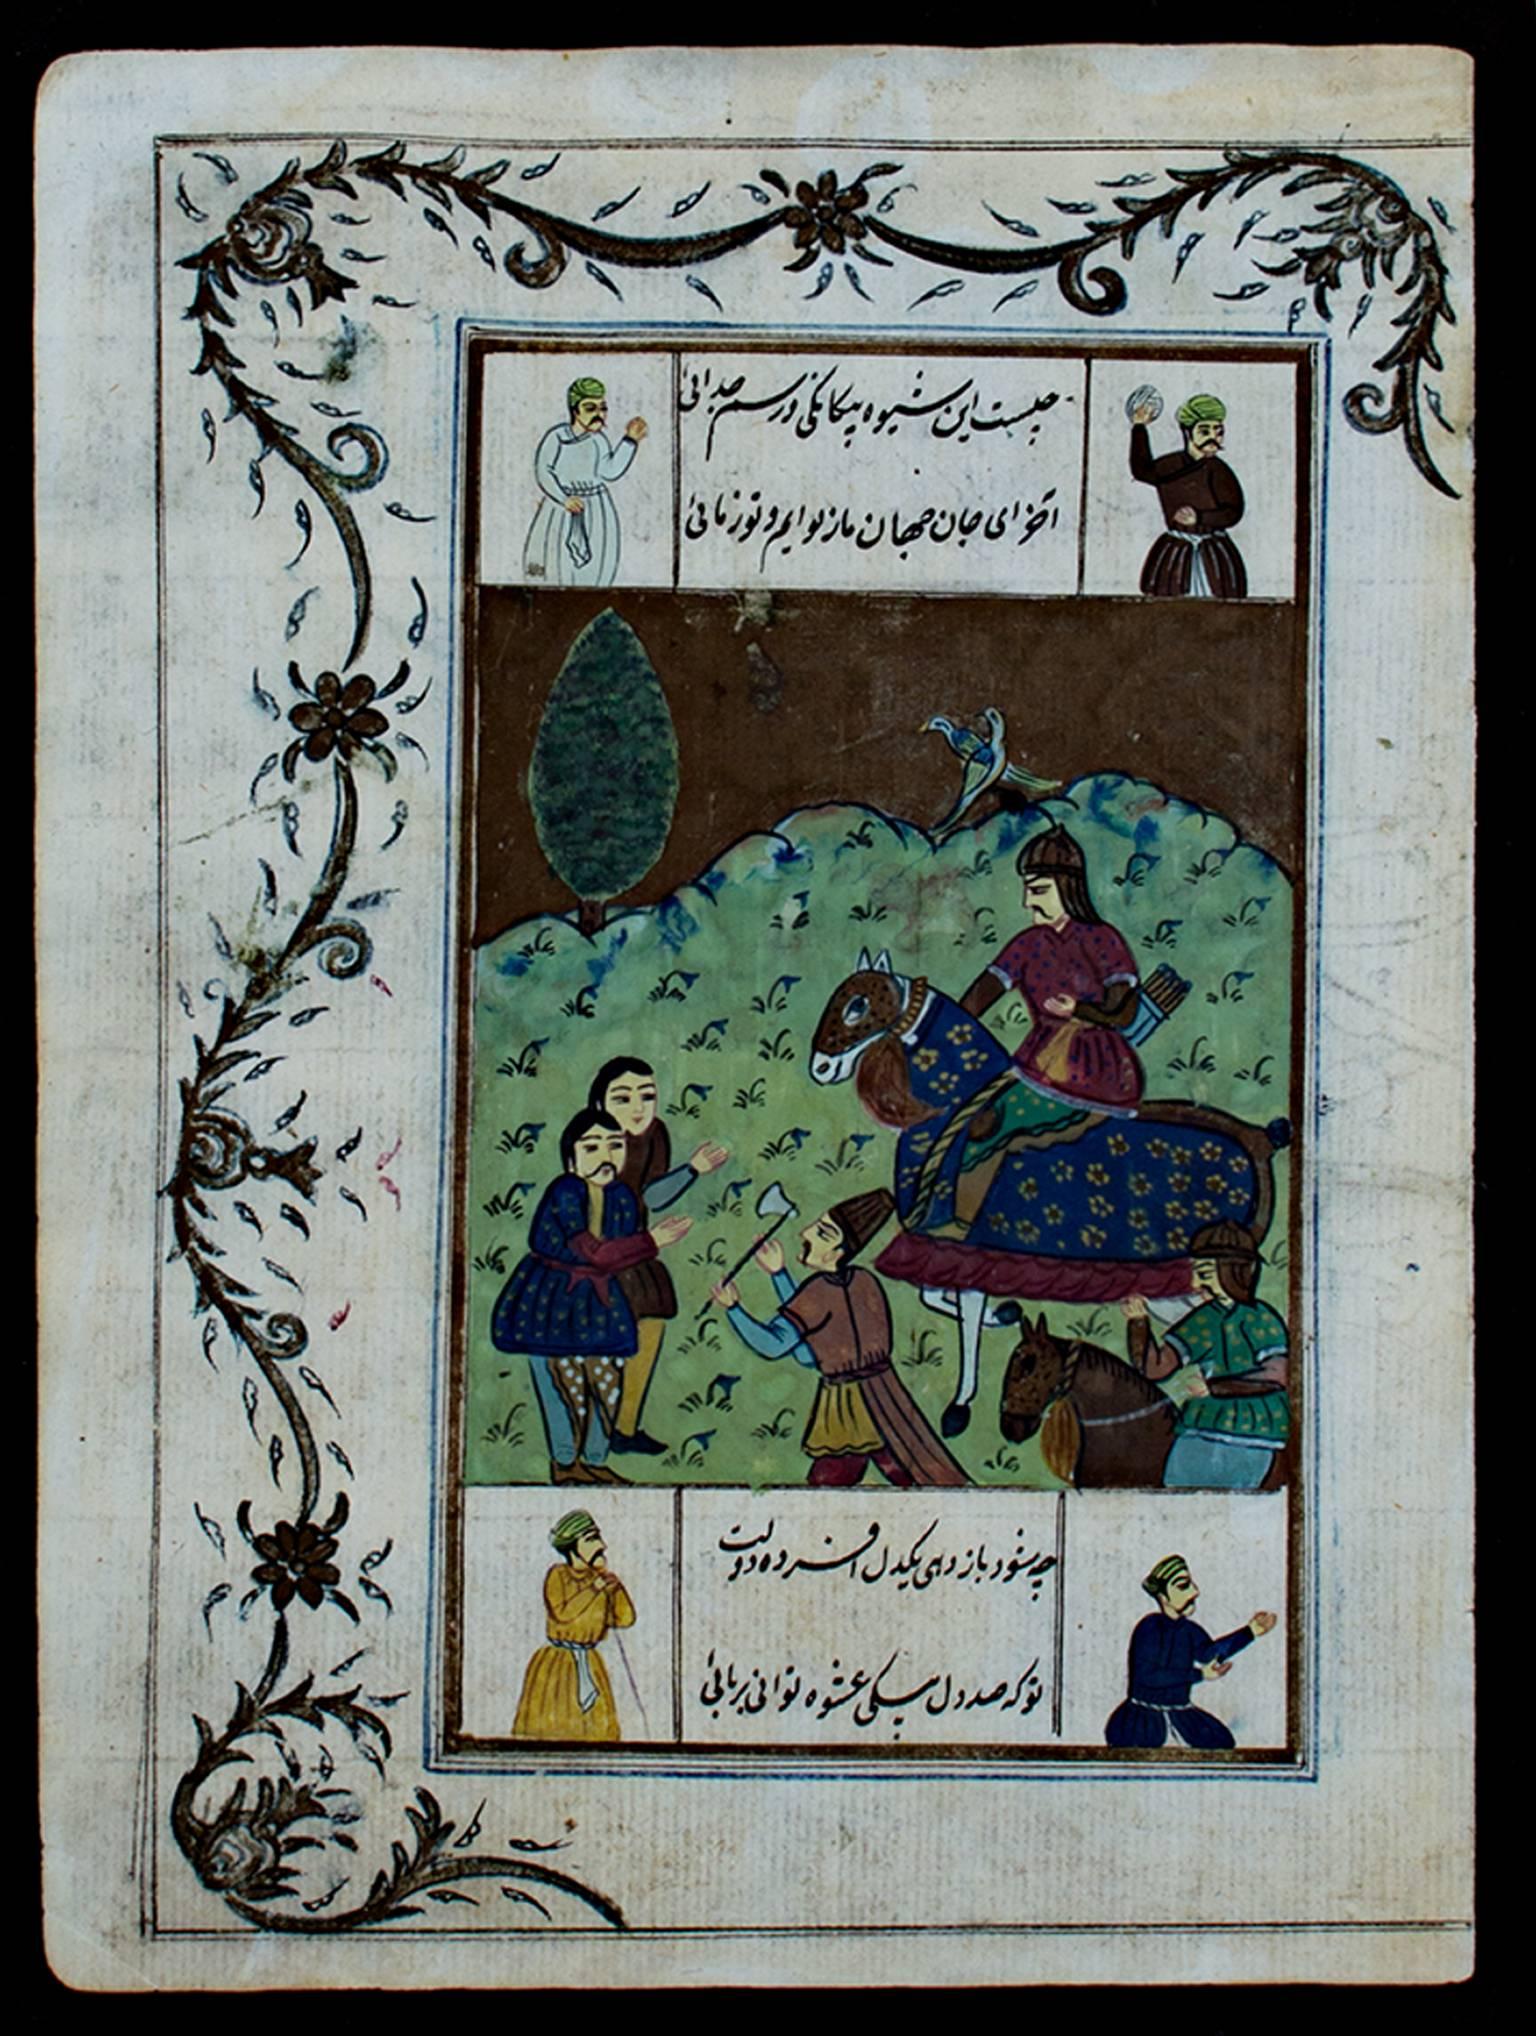 Unknown Figurative Art - "Two Warriors on Horseback, Foot Soldier, and Civilians, " Persian Book Page